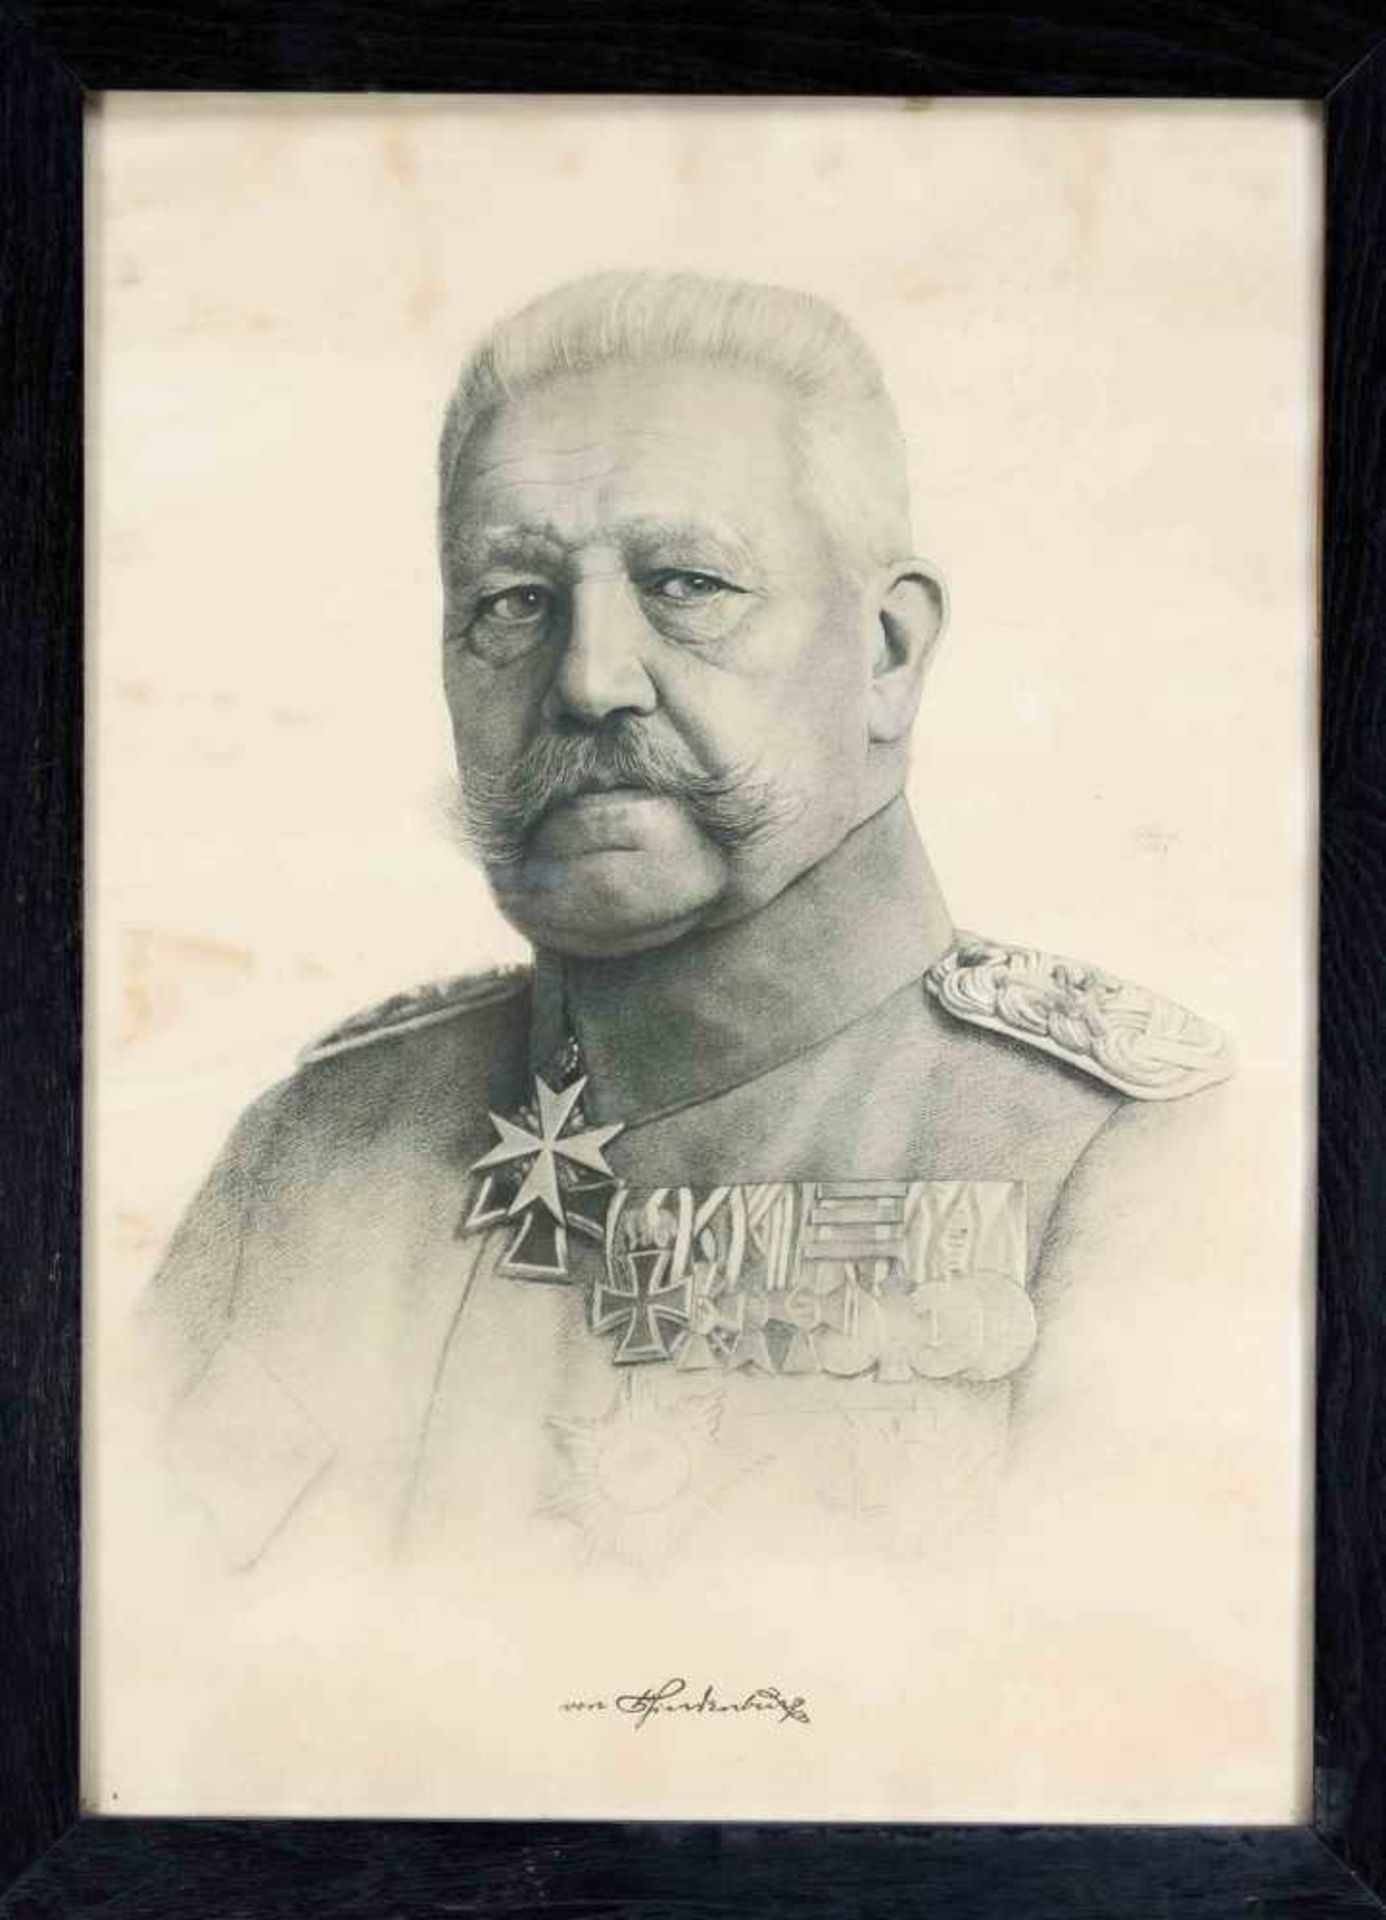 B. Winter, large lithograph with a portrait of Paul von Hindenburg, signed in the stone.